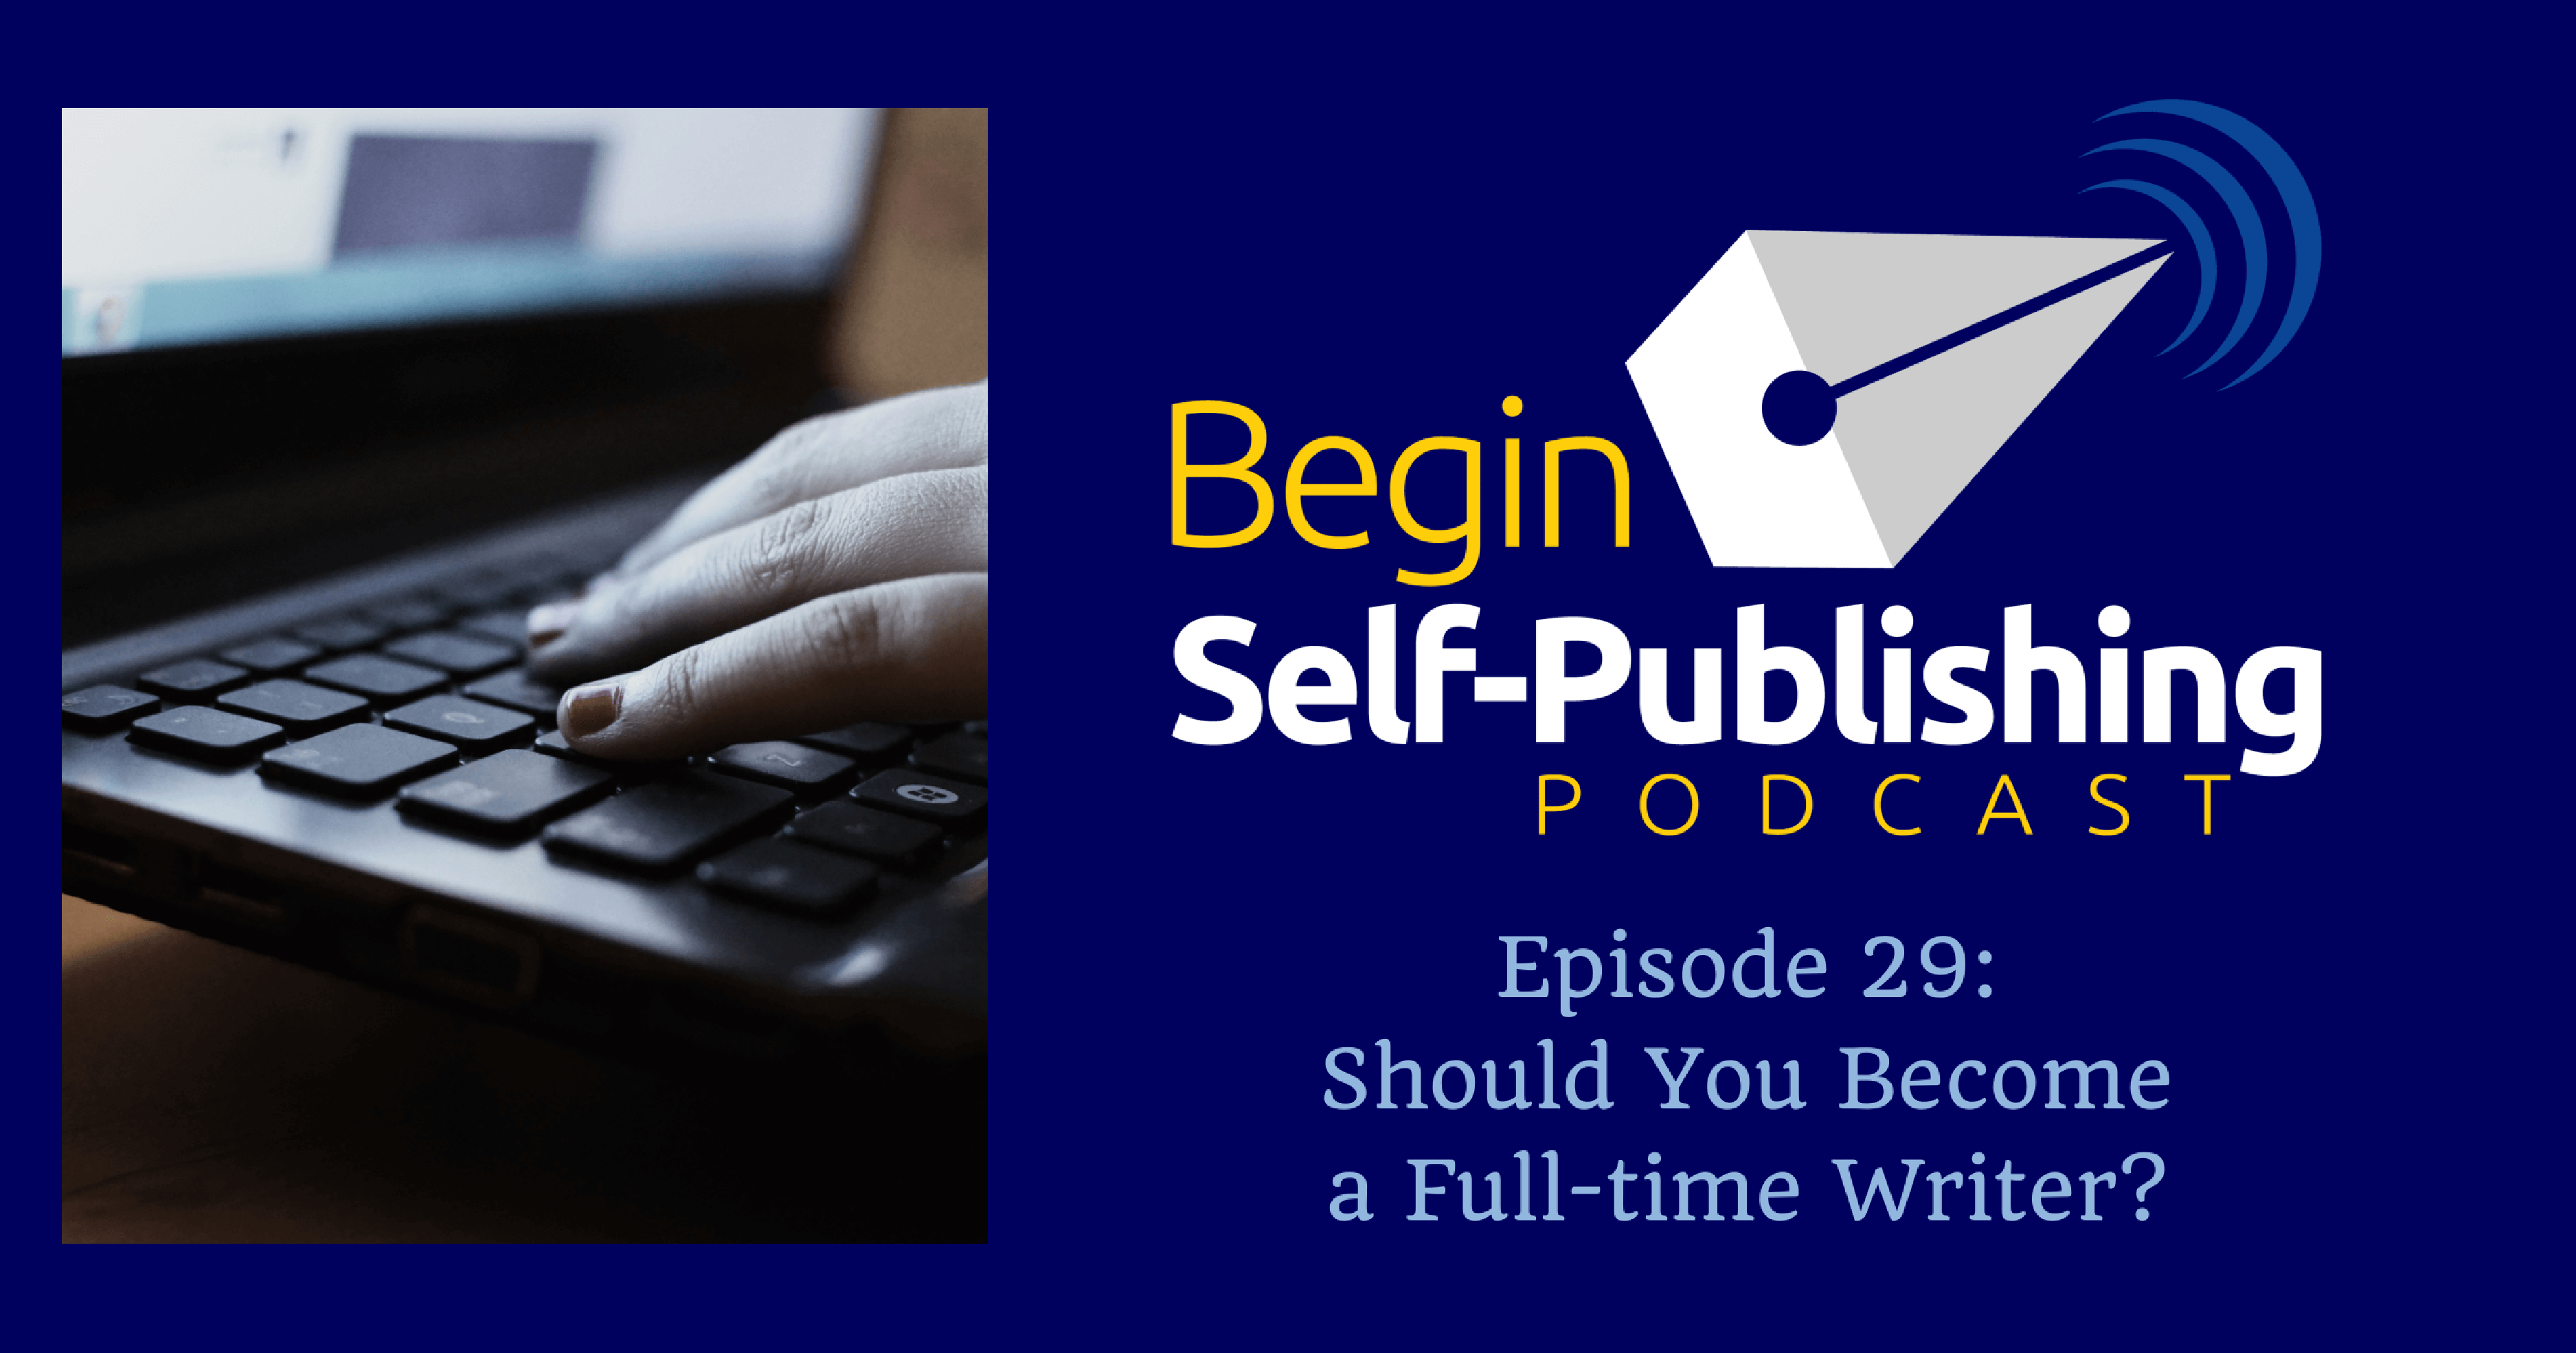 Should You Become a Full-time Writer? - Begin Self-Publishing